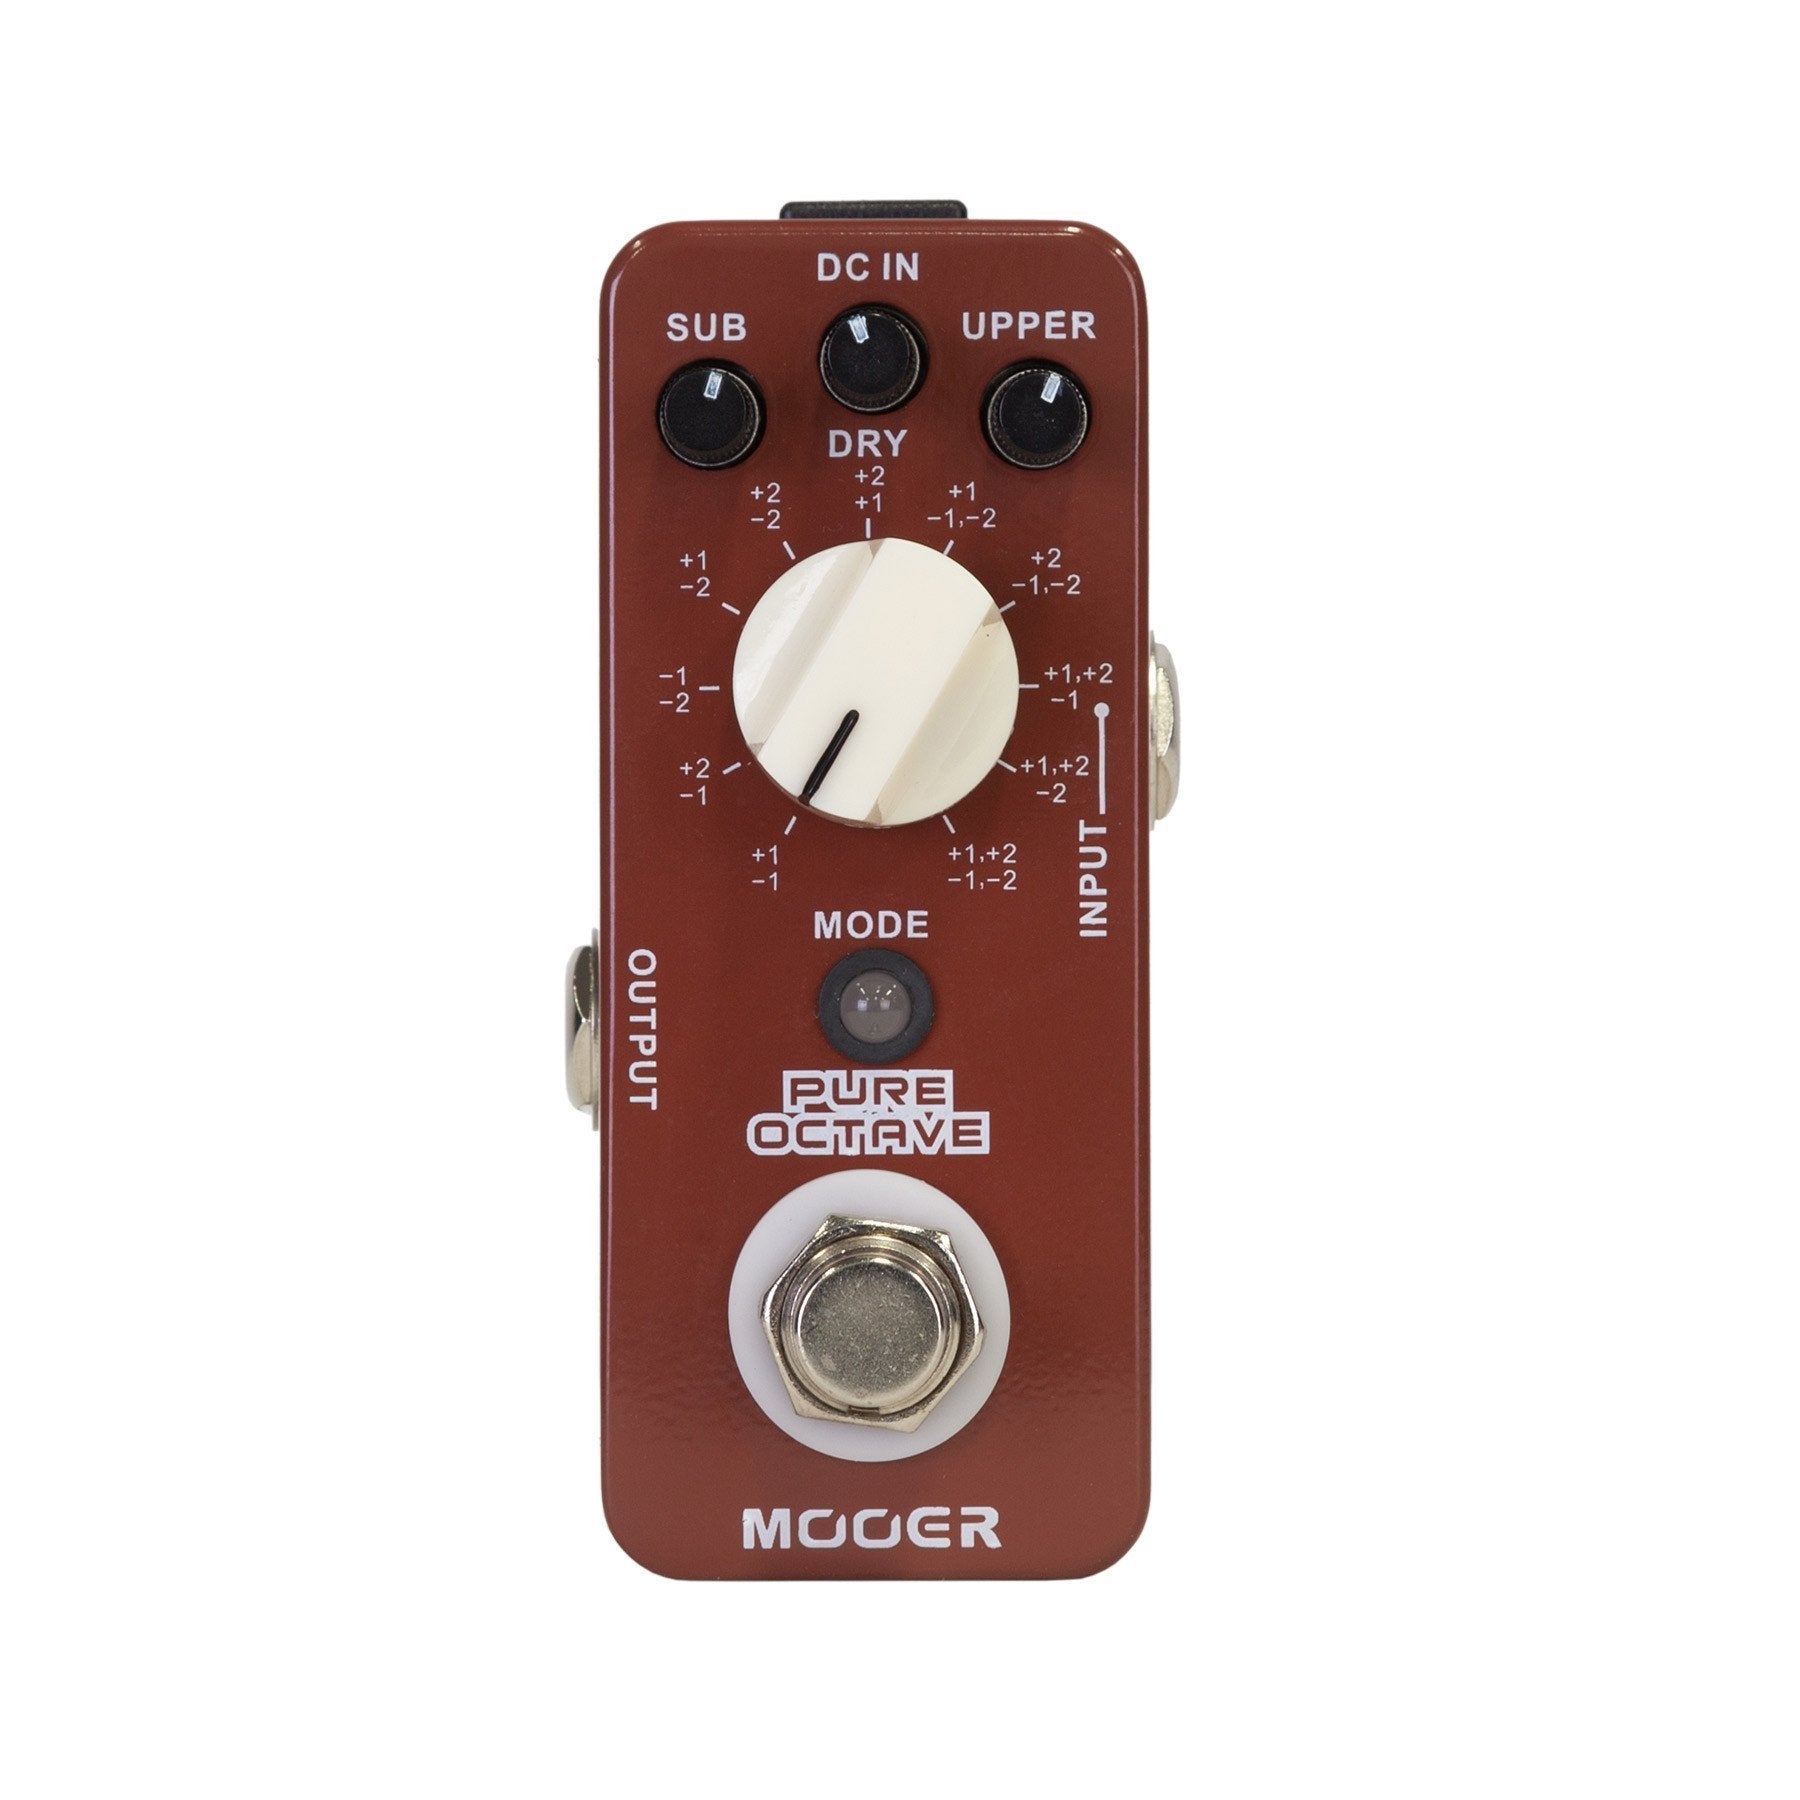 Mooer 'Pure Octave' Polyphonic Octave Micro Guitar Effects Pedal-MEP-PO